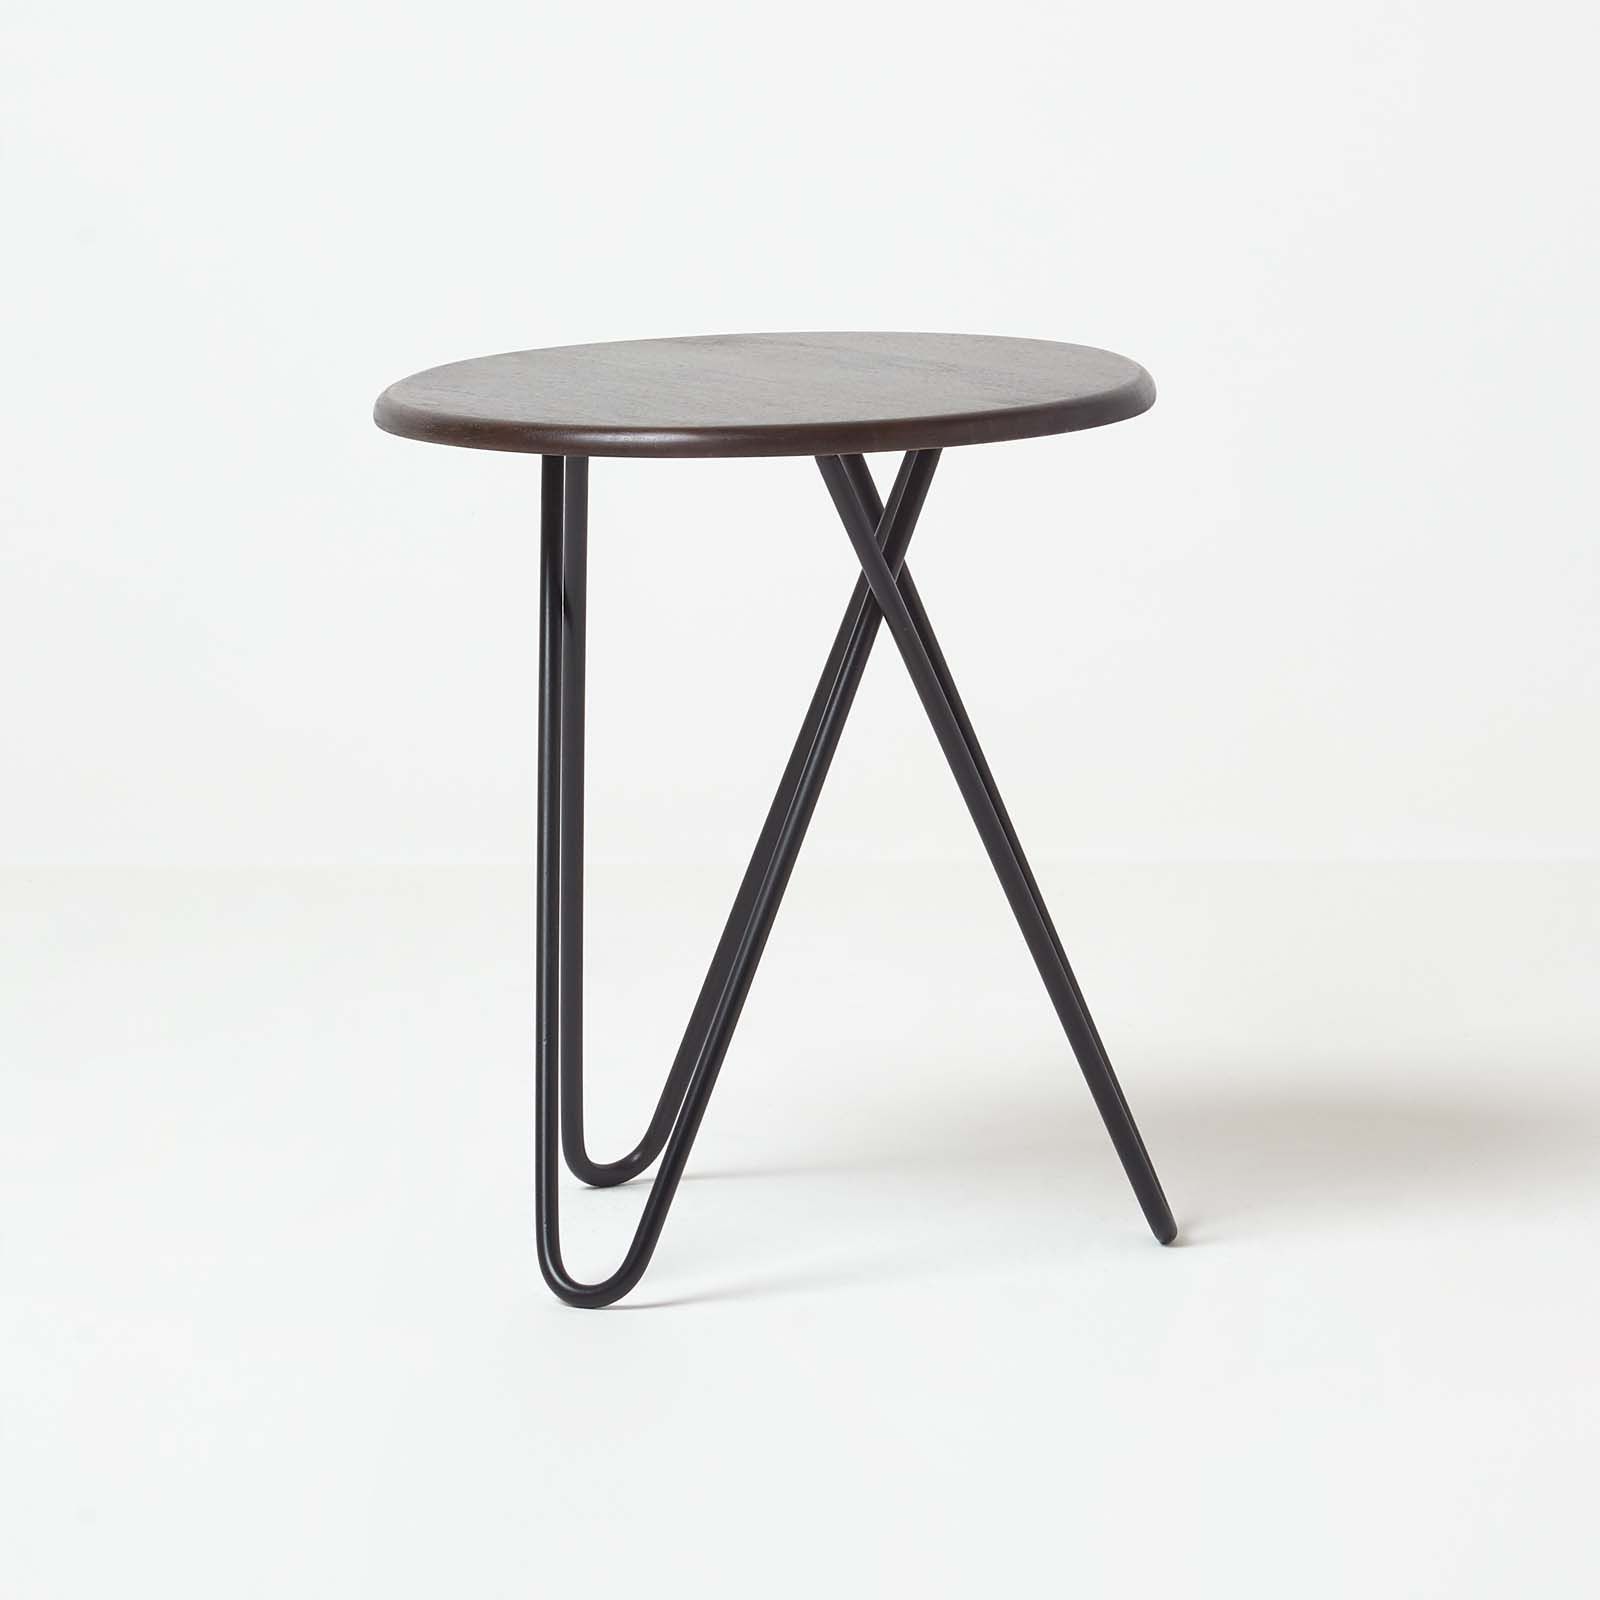 Soho Hairpin Leg Side Table, Dark Pertaining To Coffee Tables With Tripod Legs (View 2 of 15)